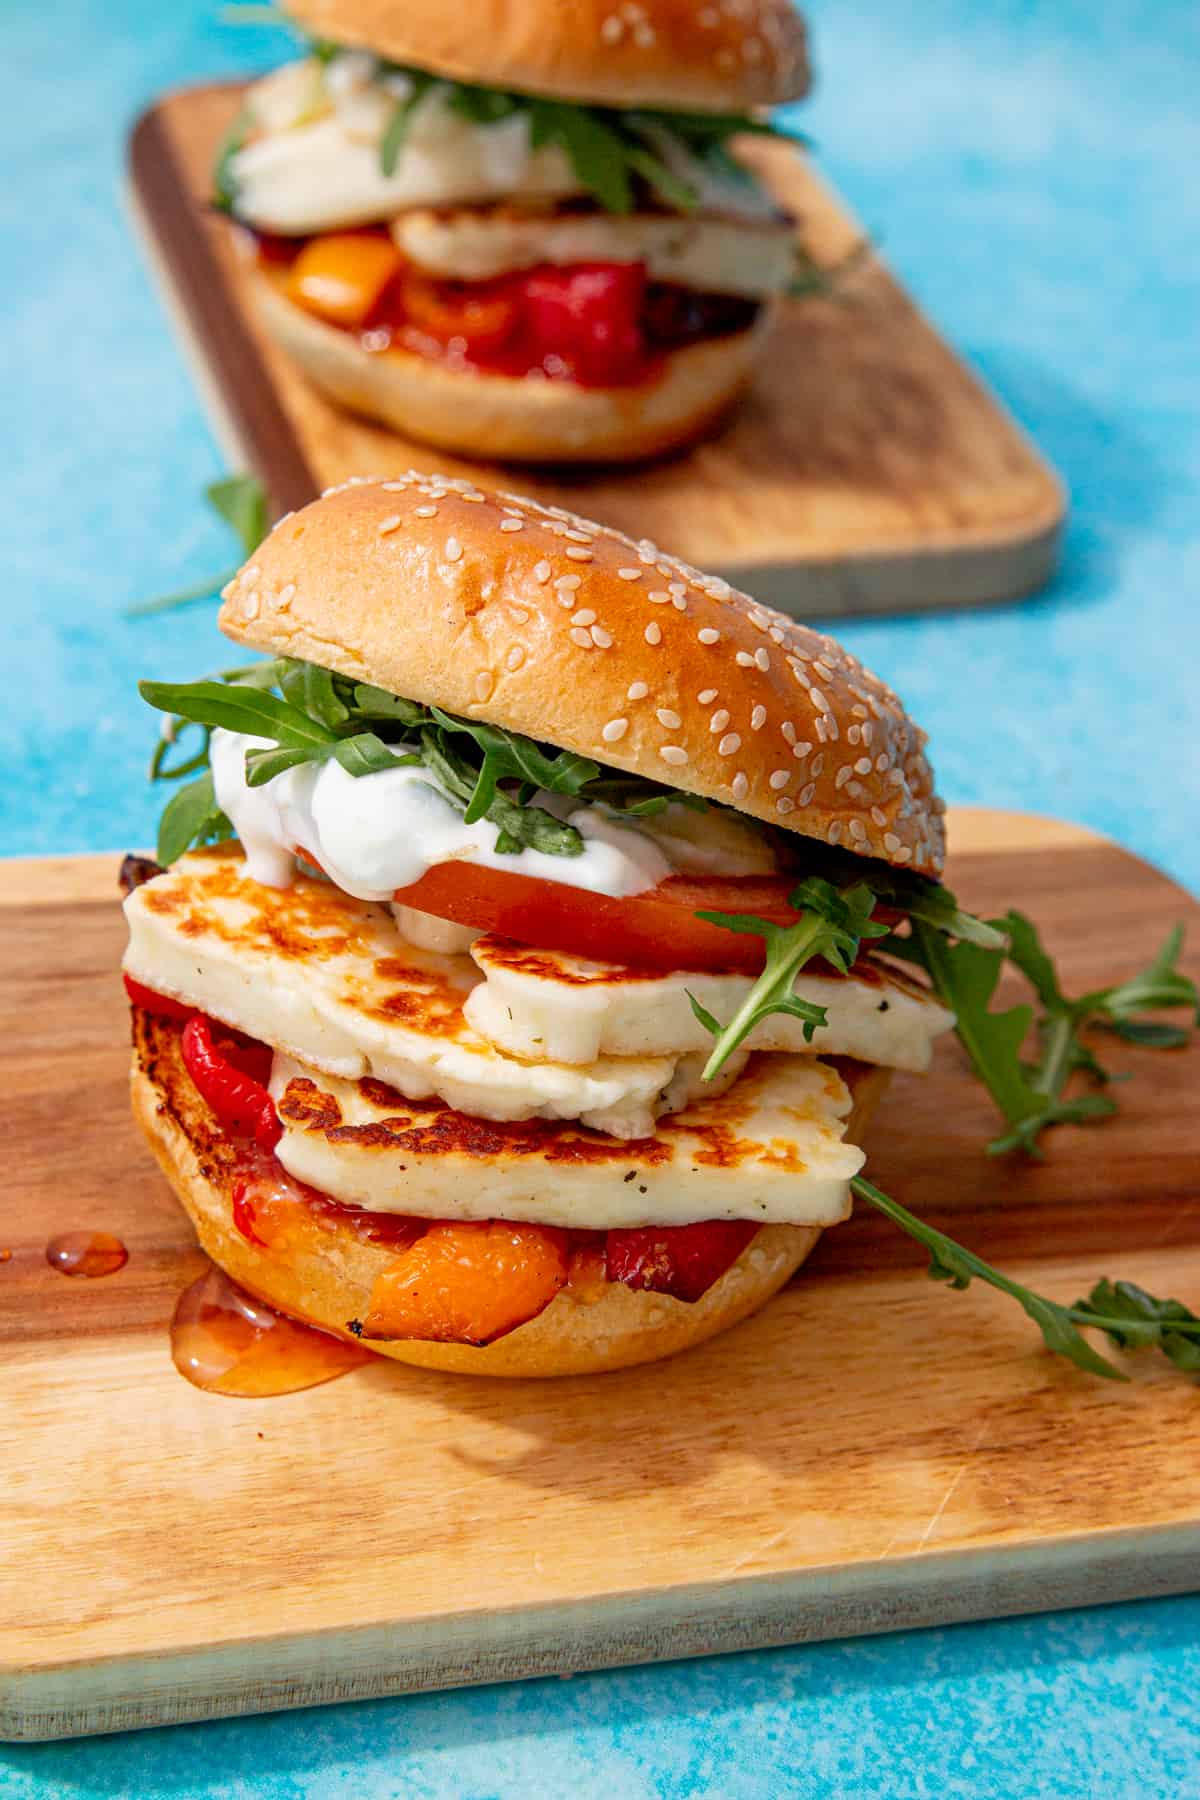 2 halloumi burgers with golden browned halloumi slices, peppers, tomatoes rocket, sweet chilli sauce and tzatziki in a sesame bun on 2 mini wooden chopping boards.